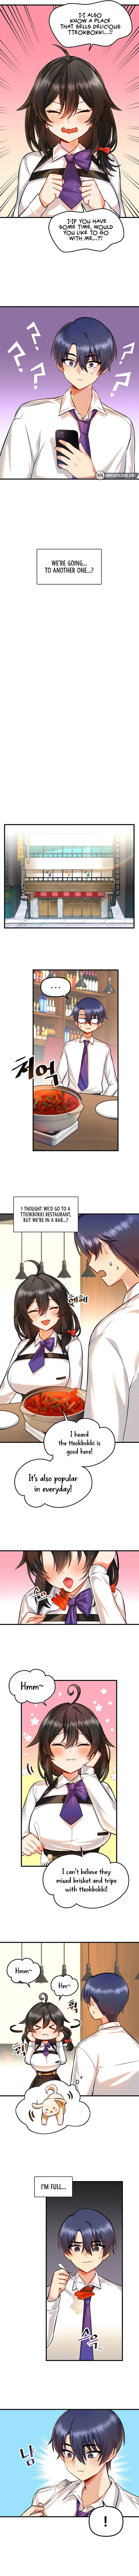 trapped-in-the-academys-eroge-chap-3-4